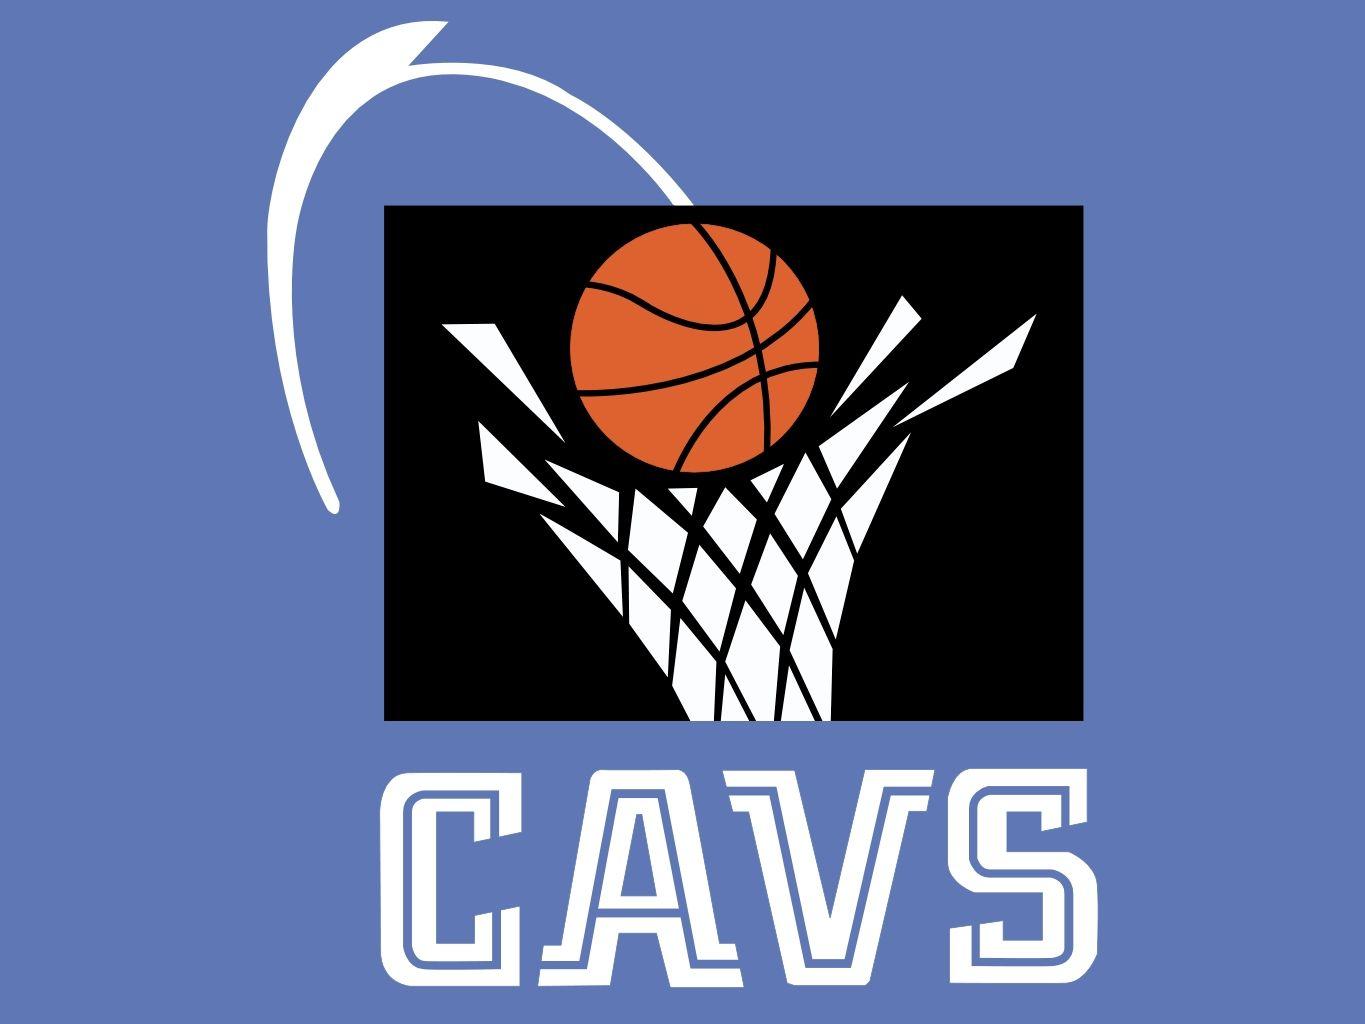 My all time favorite Cleveland Cavaliers logo. From the 90s